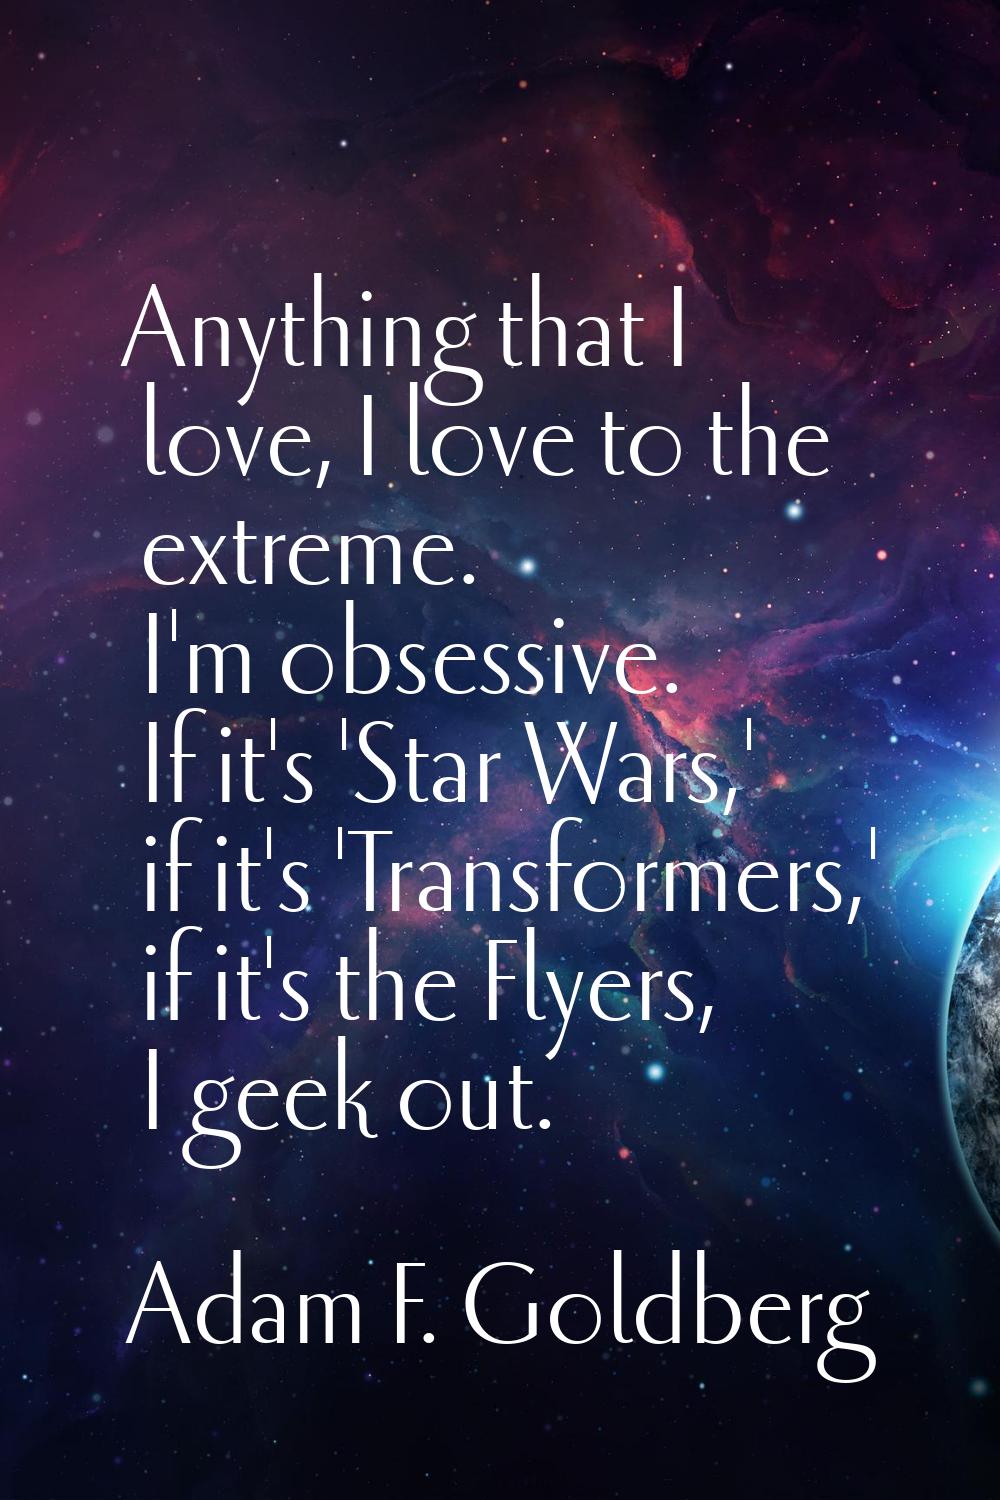 Anything that I love, I love to the extreme. I'm obsessive. If it's 'Star Wars,' if it's 'Transform